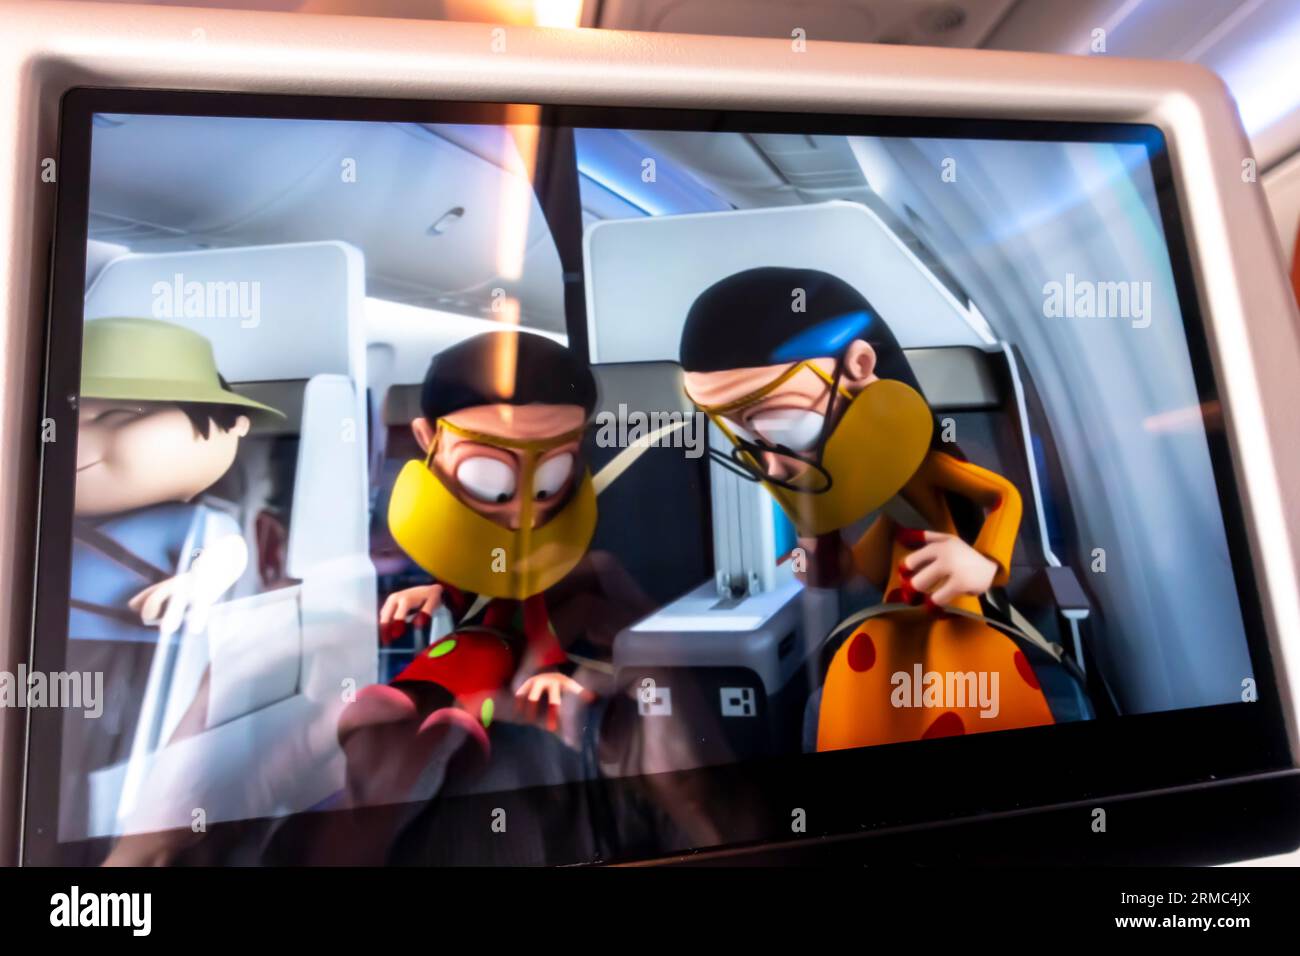 Personal television, PTV in front of an airplane seat showing instructions on FlyDubai flight Stock Photo